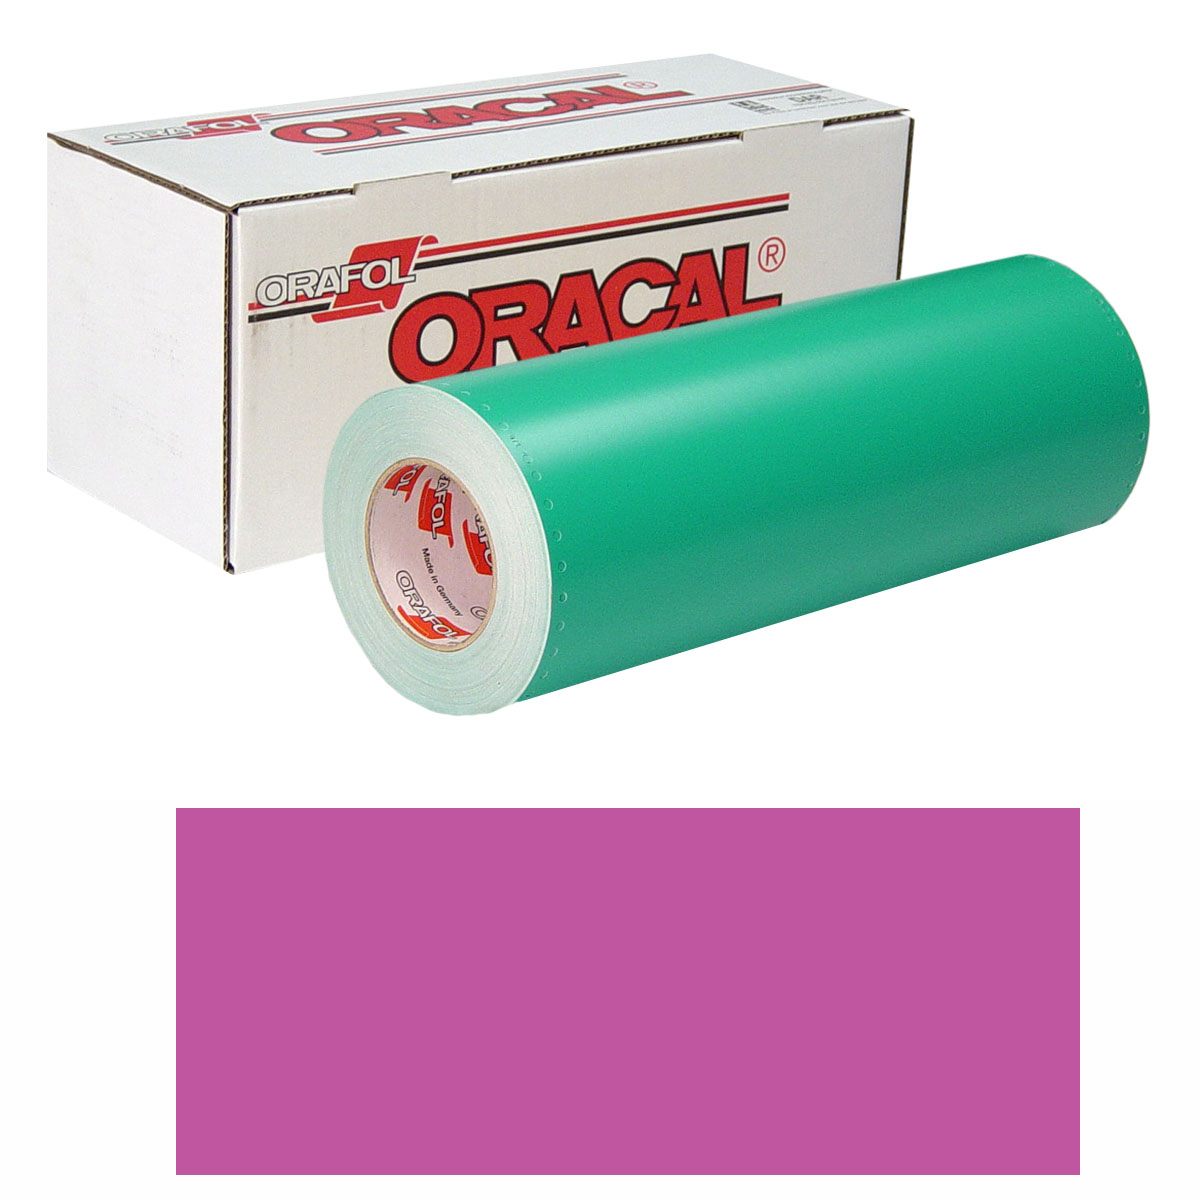 ORACAL 8500 15in X 50yd 413 Light Pink